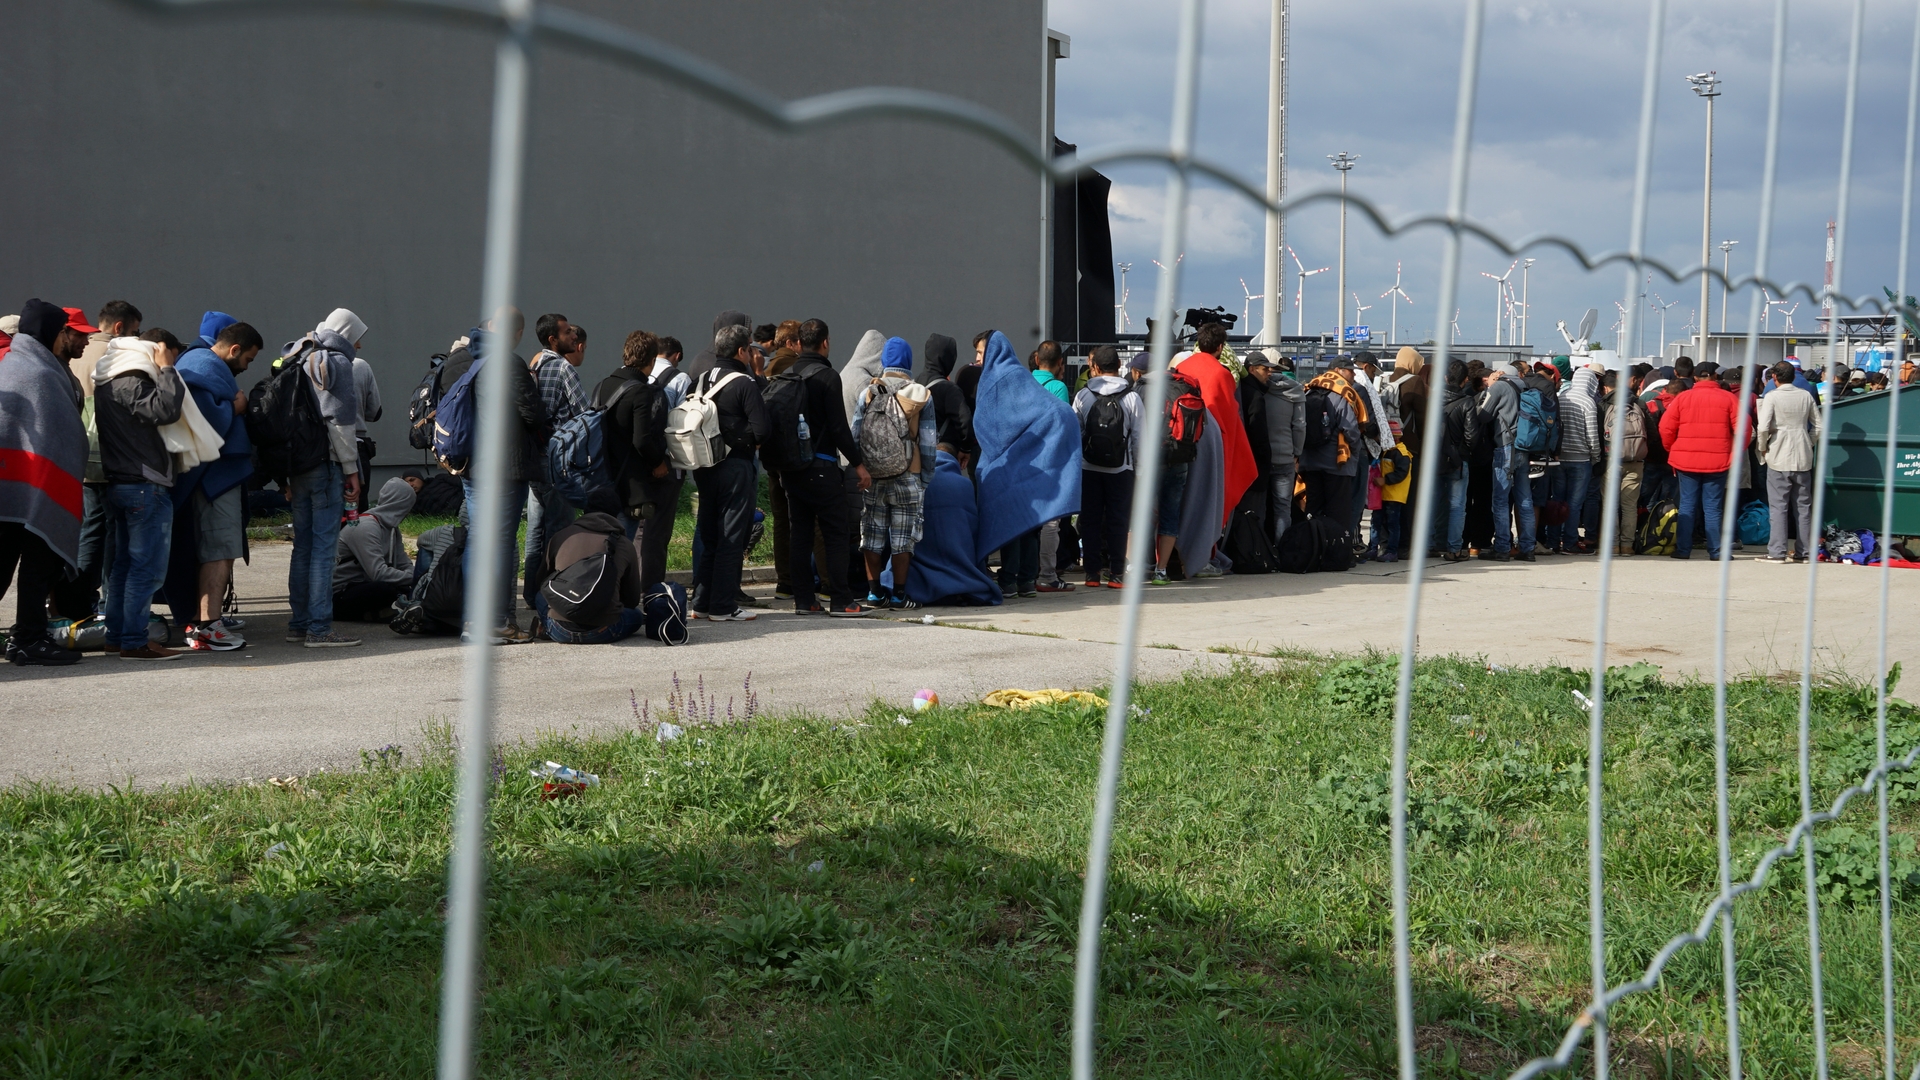 A_line_of_Syrian_refugees_crossing_the_border_of_Hungary_and_Austria_on_their_way_to_Germany._Hungary,_Central_Europe,_6_September_2015